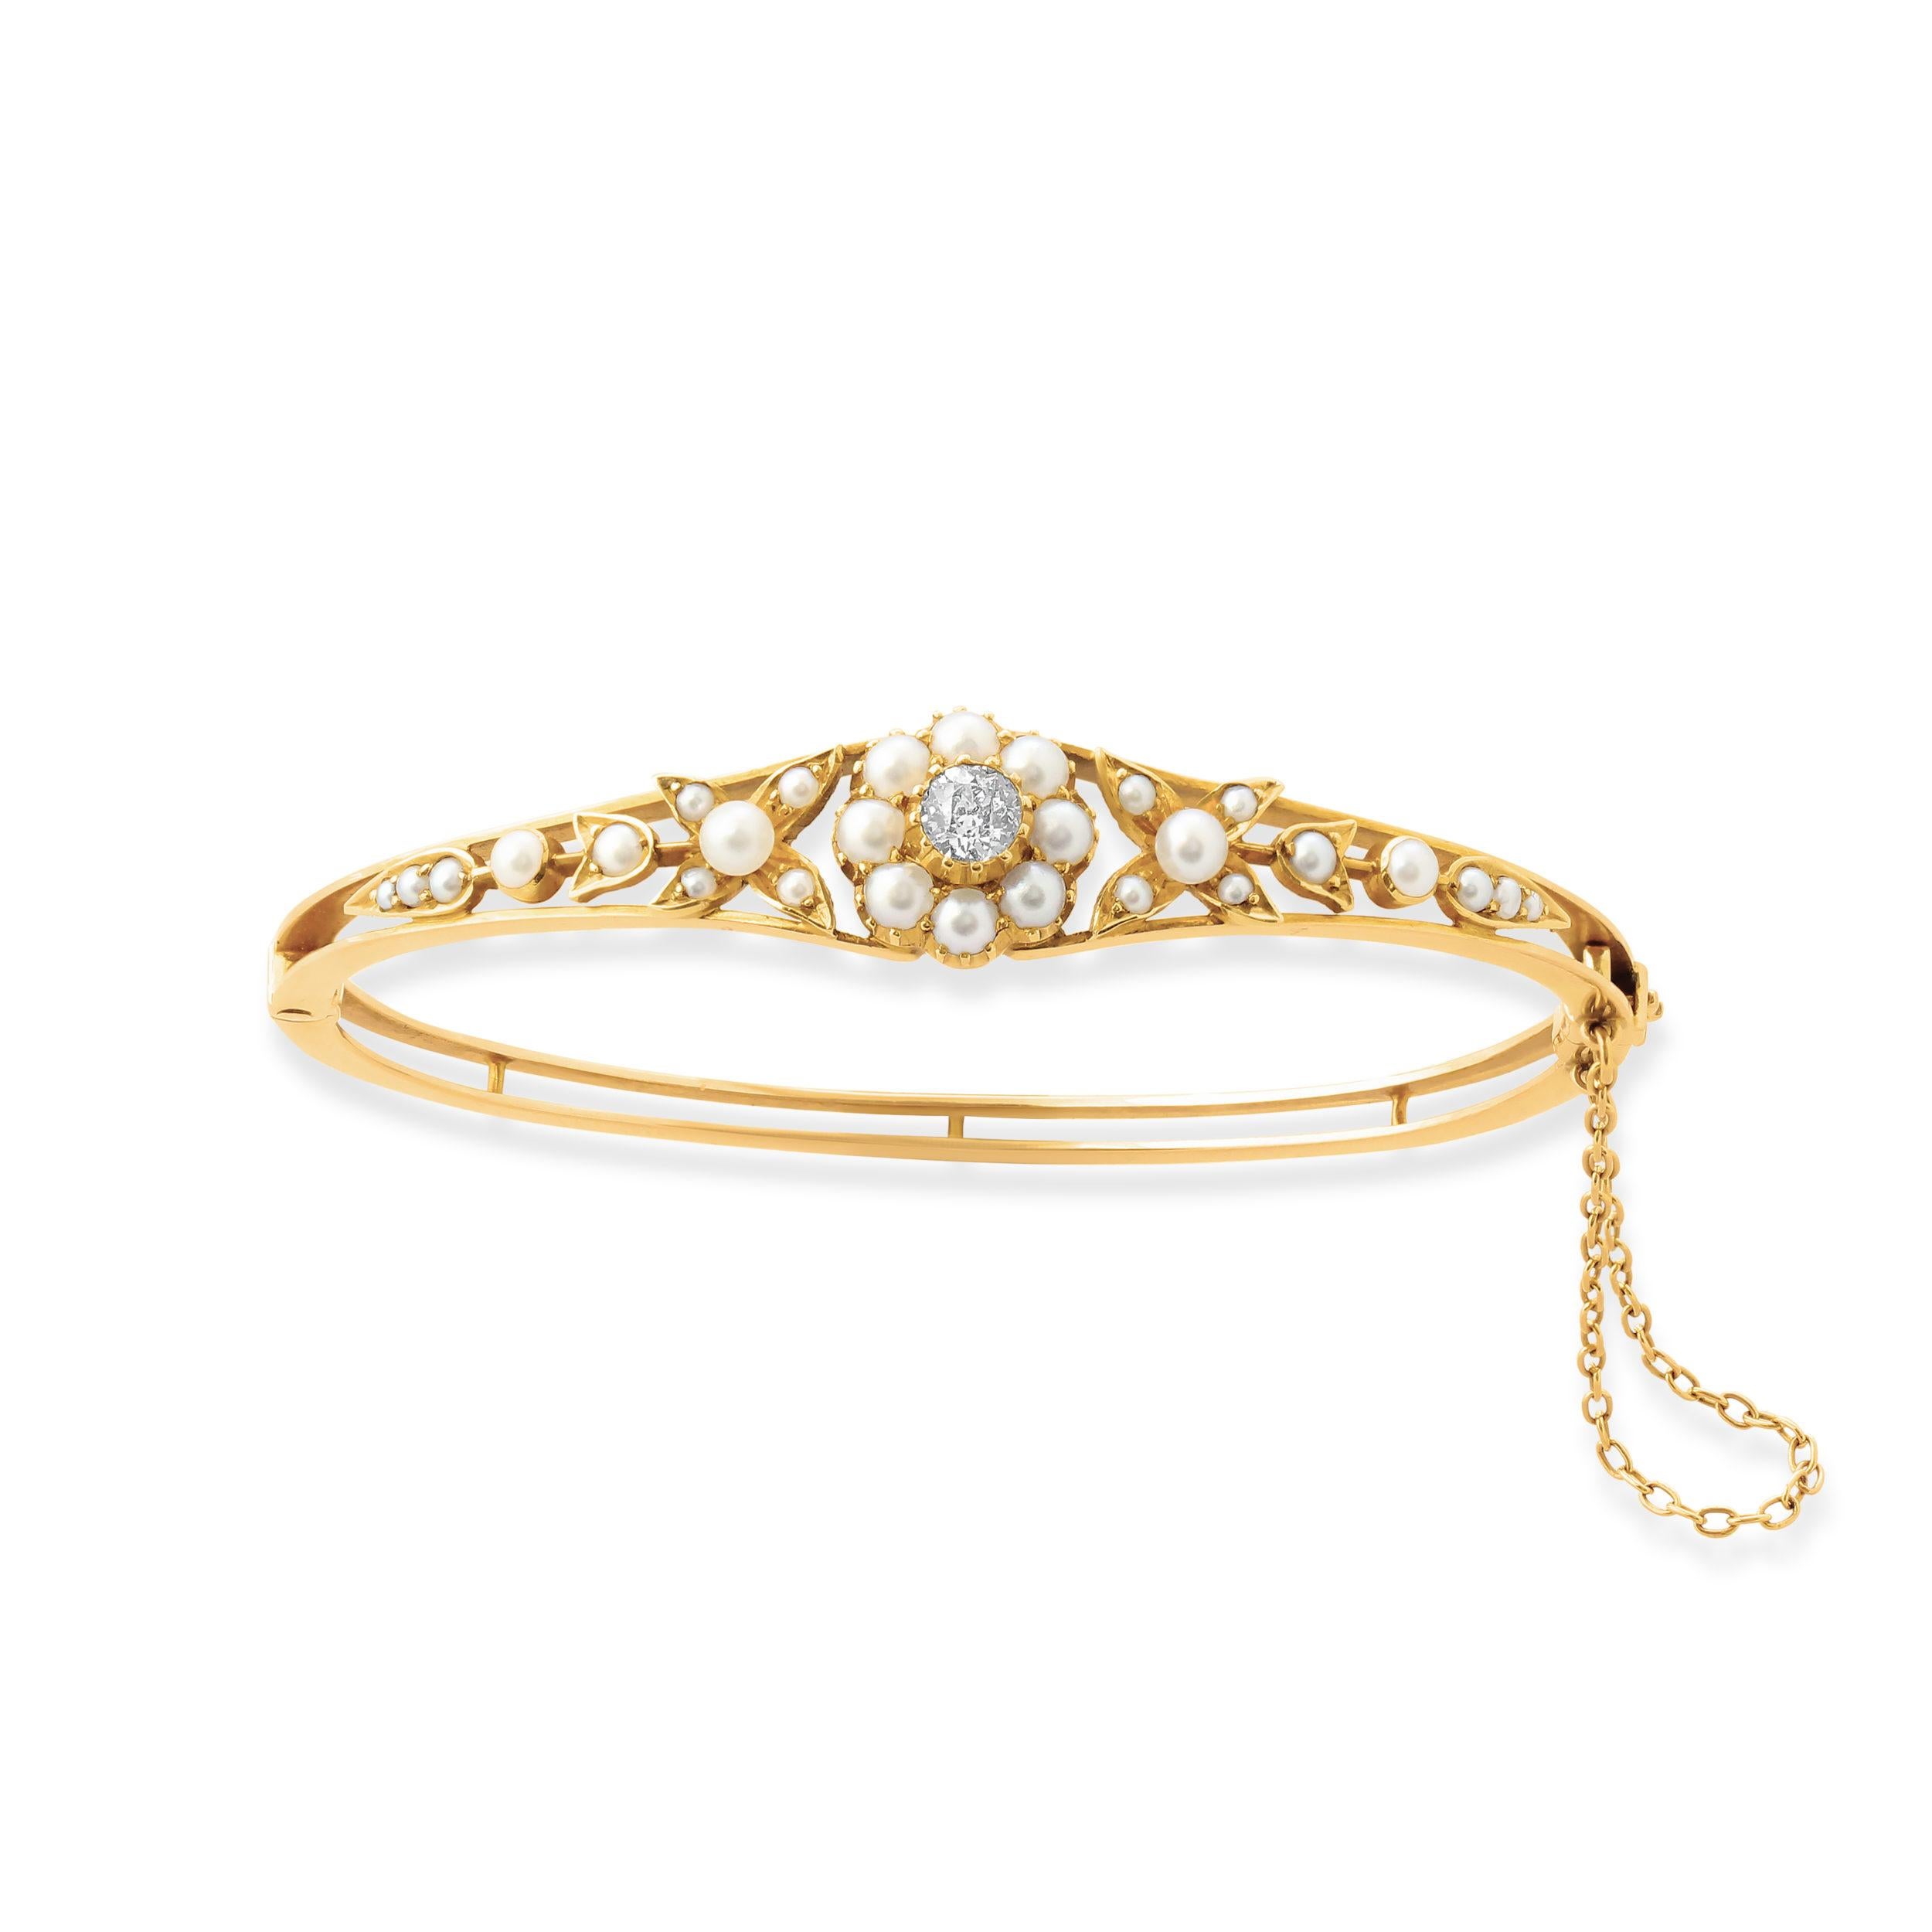 An Edwardian gold, diamond and pearl hinged bangle. Set at the centre with an old-cut diamond of approximately 0.35 carats surrounded by a cluster of natural pearls with additional pearls in a foliate design set along the front. 